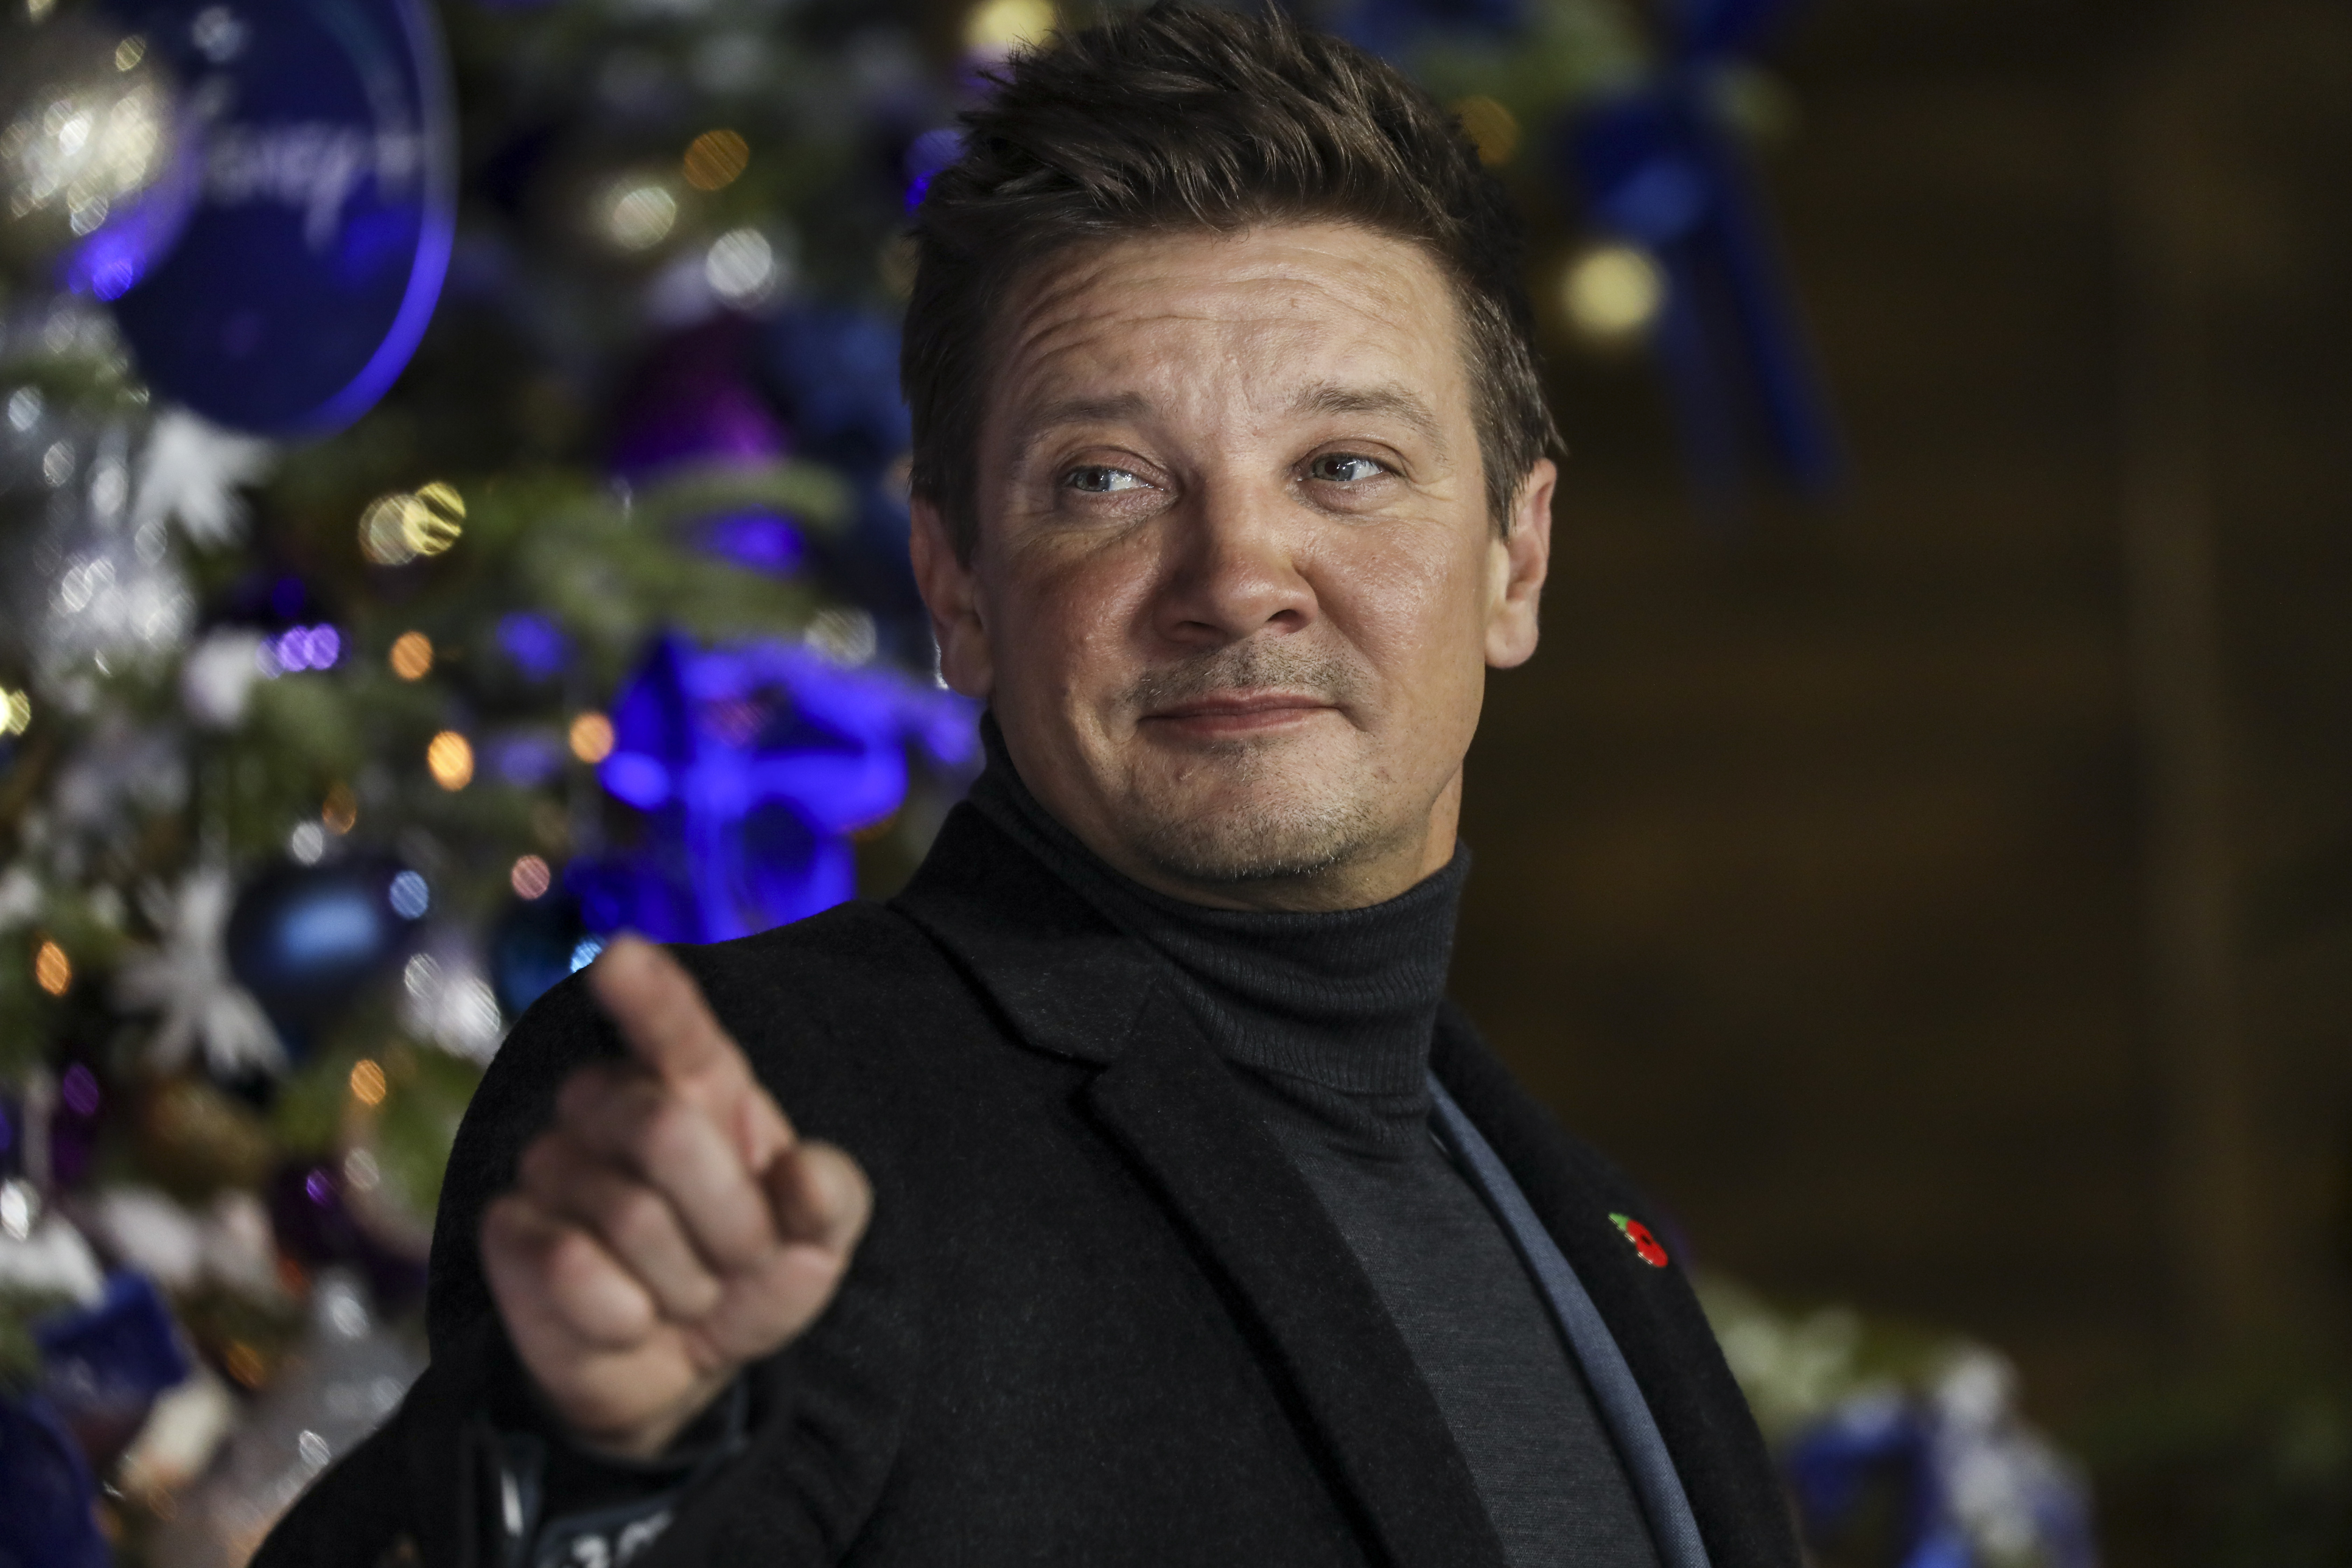 FILE - Jeremy Renner poses for photographers upon arrival at the UK Fan Screening of the film "Hawkeye," in London, on Nov. 11, 2021. Renner spent Monday, May 22, 2023, pitching an amendment to Nevada lawmakers to include his home region in a tax deal to expand the film industry to Las Vegas. But his hopes of making northern Nevada a film hub likely are on hold after the bill sponsor said it's too late to amend it. (Photo by Vianney Le Caer/Invision/AP, File)